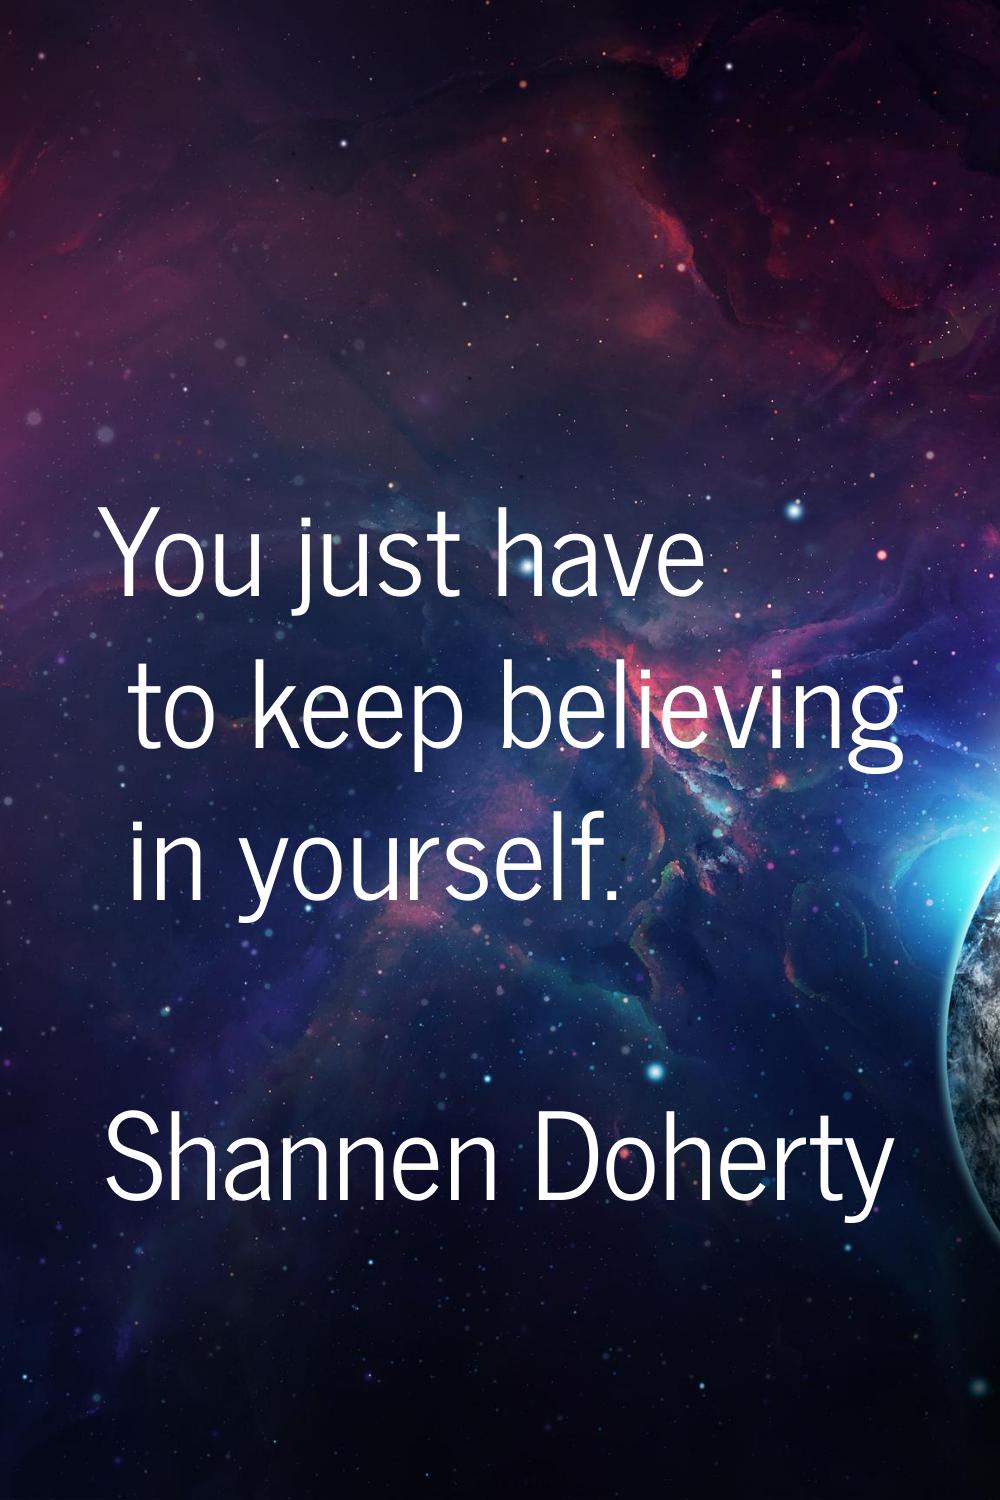 You just have to keep believing in yourself.